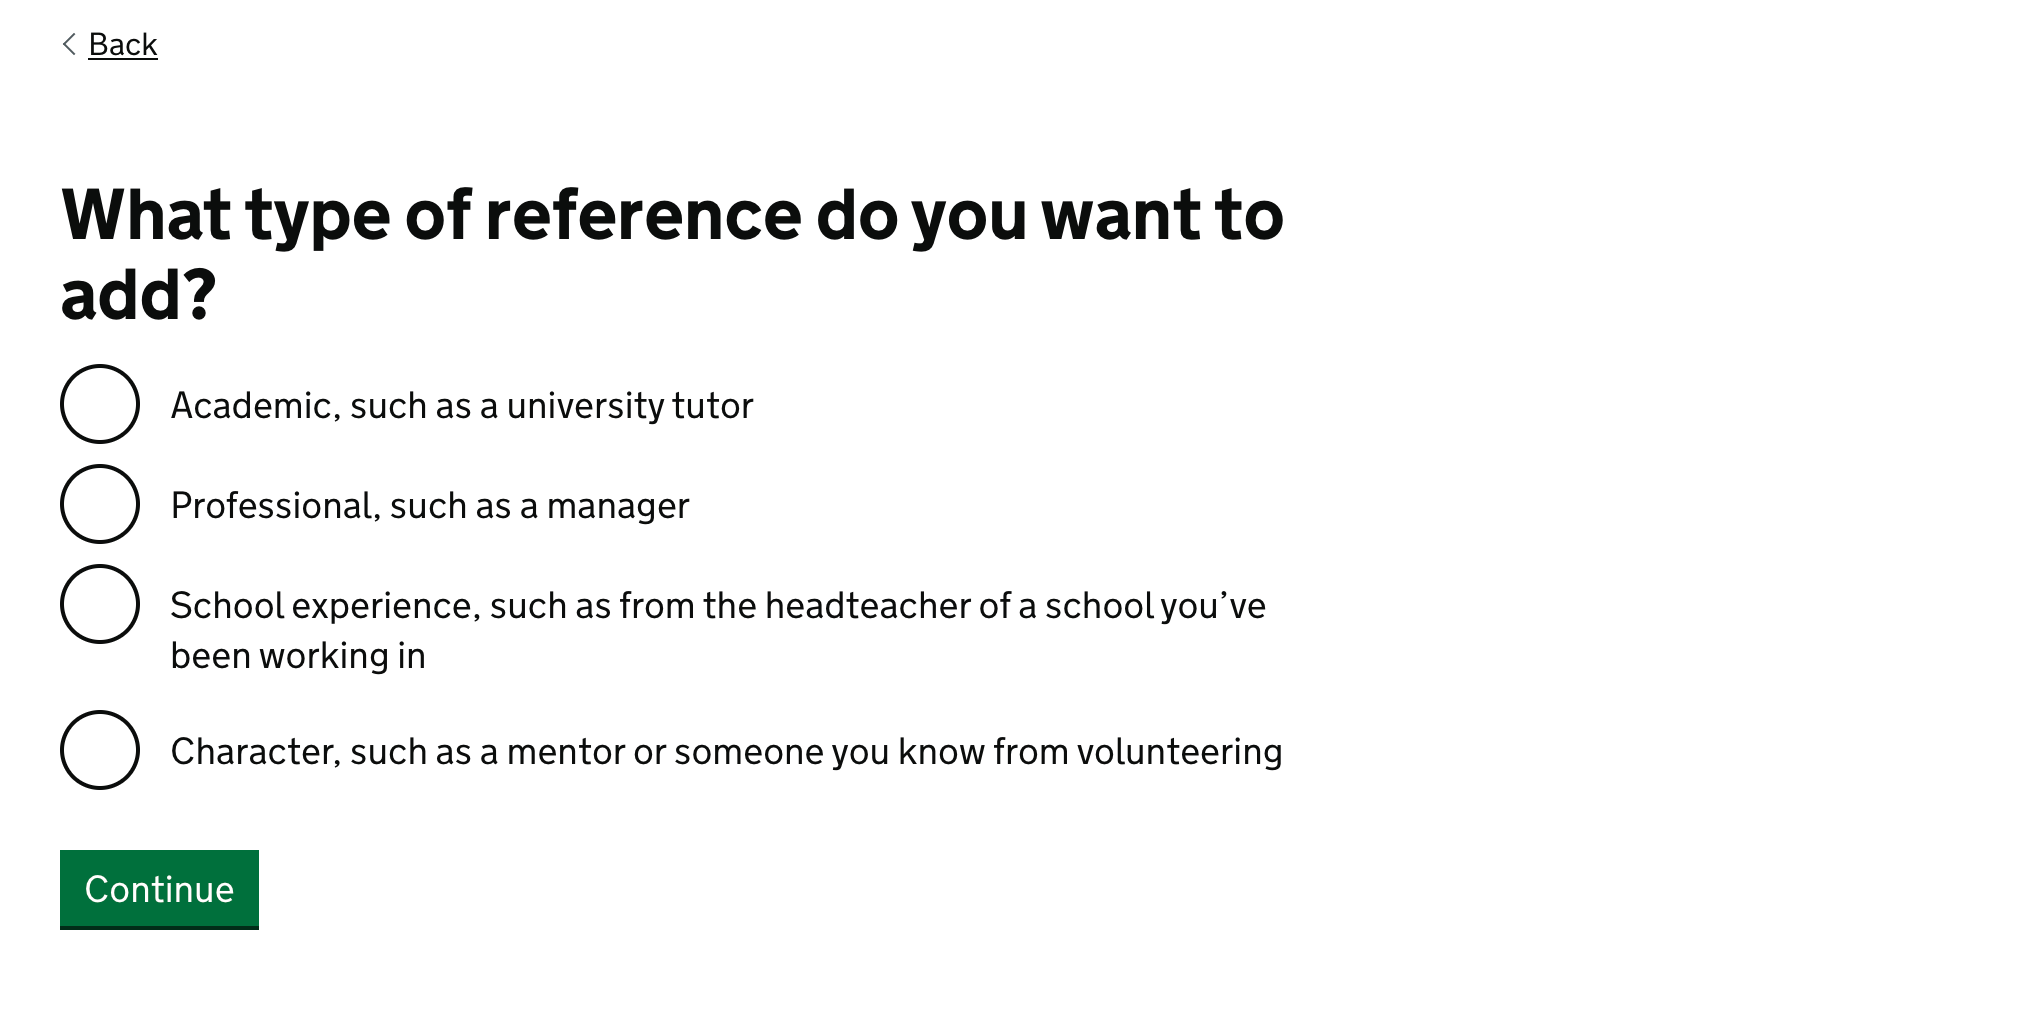 Screenshot showing question: What type of reference do you want to add? Option: Academic, such as from a university tutor. Option: Professional, such as from a manager. Option: School experience, such as from the headteacher of a school you’ve been working in. Option: Character, such as from a mentor or someone you know from volunteering.